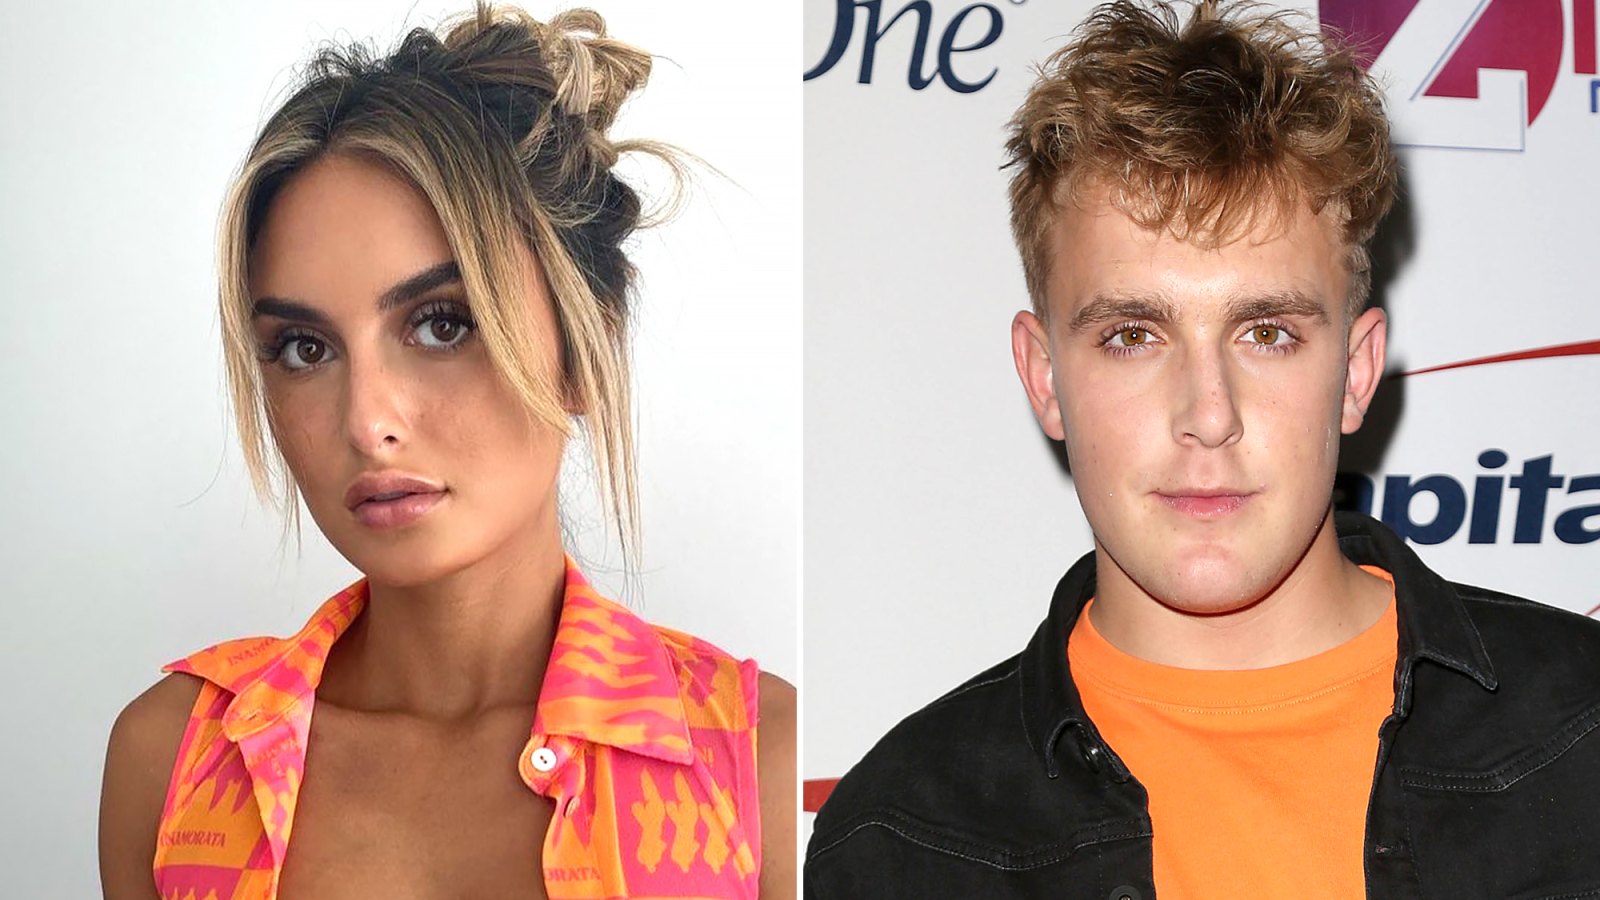 'Are You the One?' Star Julia Rose Talks Reuniting with Ex Jake Paul at Triller Fight Club: 'We Should Be Able to Coexist'